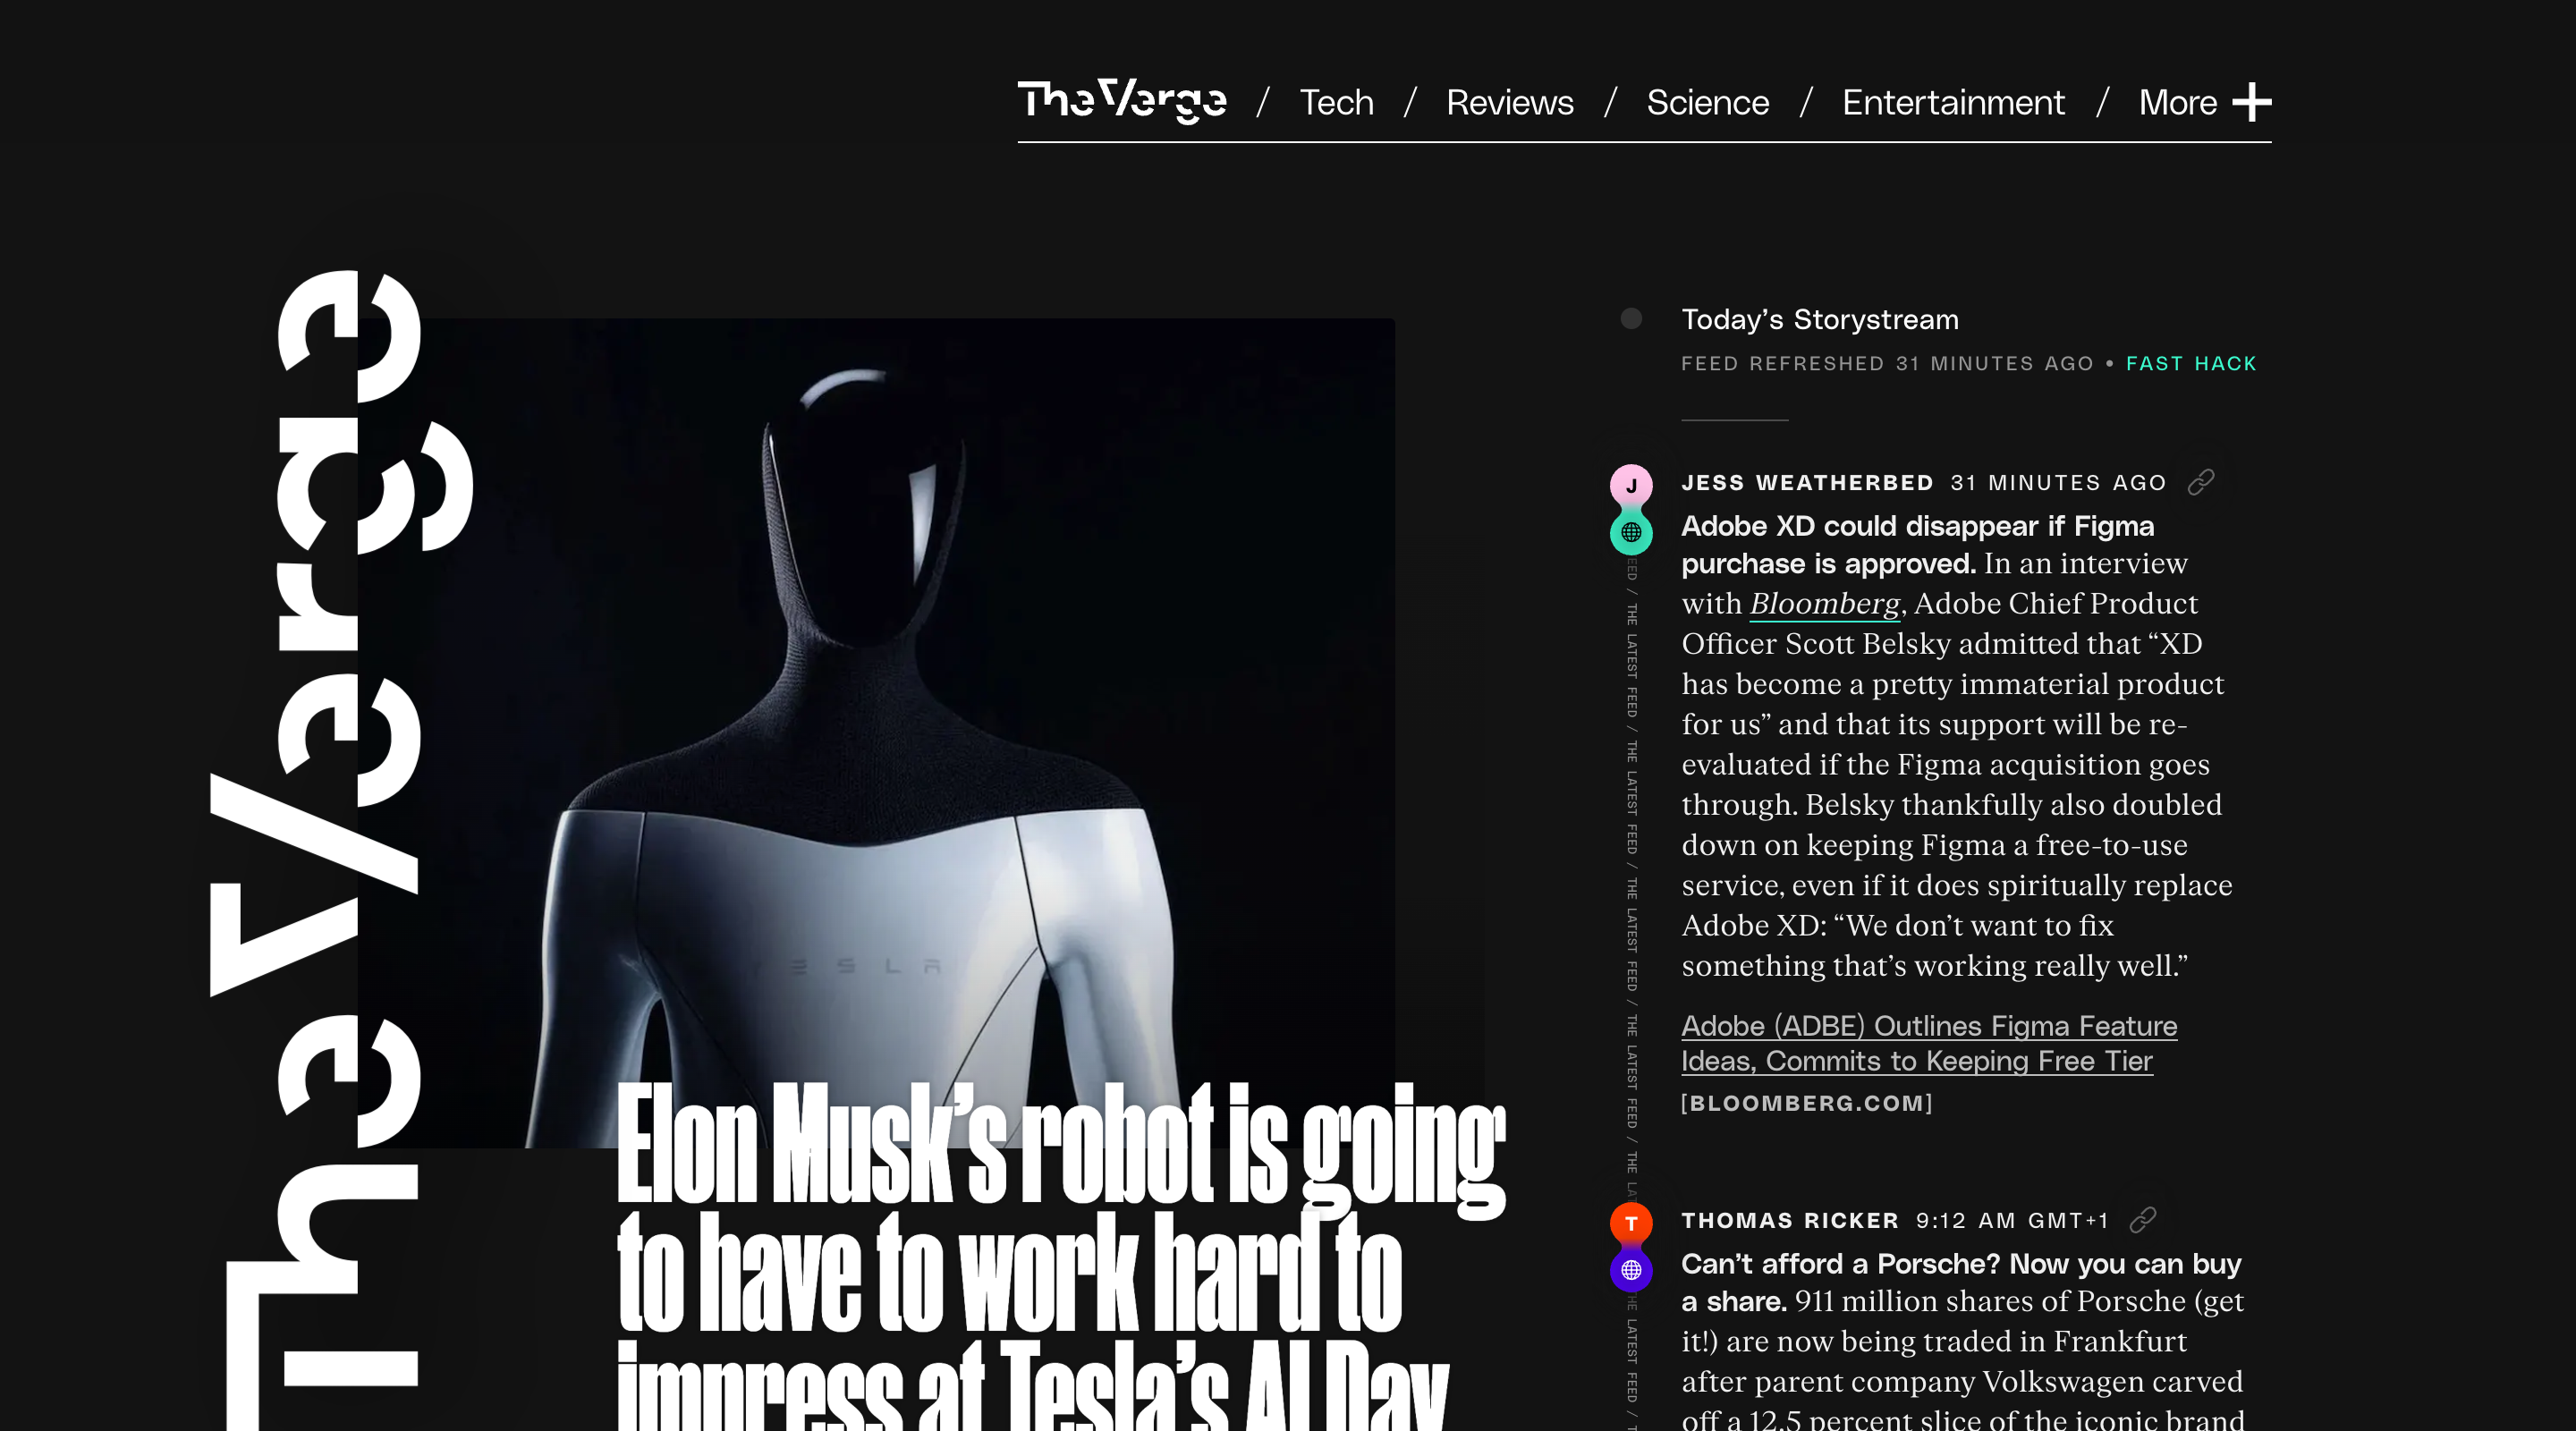 Screenshot of the Verge home page. The header contains the Verge logo and main site navigation. The Verge logo is also displayed down the left side of the screen, on its side. The featured article's title and image is in the center of the screen. On the right side there is a 'storystream' with blocks of text summarising additional stories.